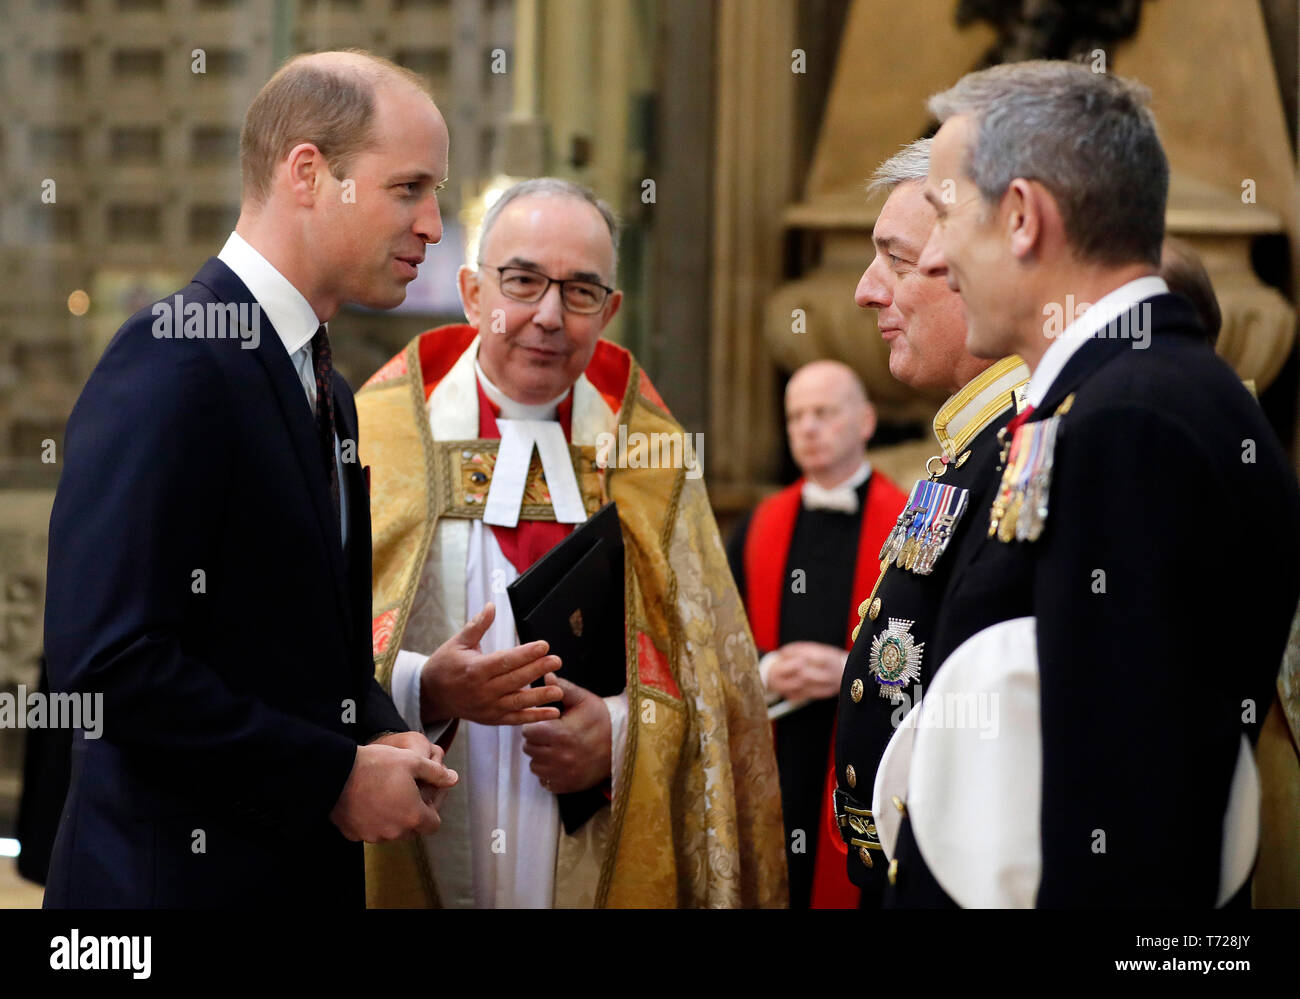 The Duke of Cambridge arrives to attend a service at Westminster Abbey to recognise fifty years of continuous deterrent at sea in his capacity as Commodore-in-Chief of the Submarine Service. Stock Photo